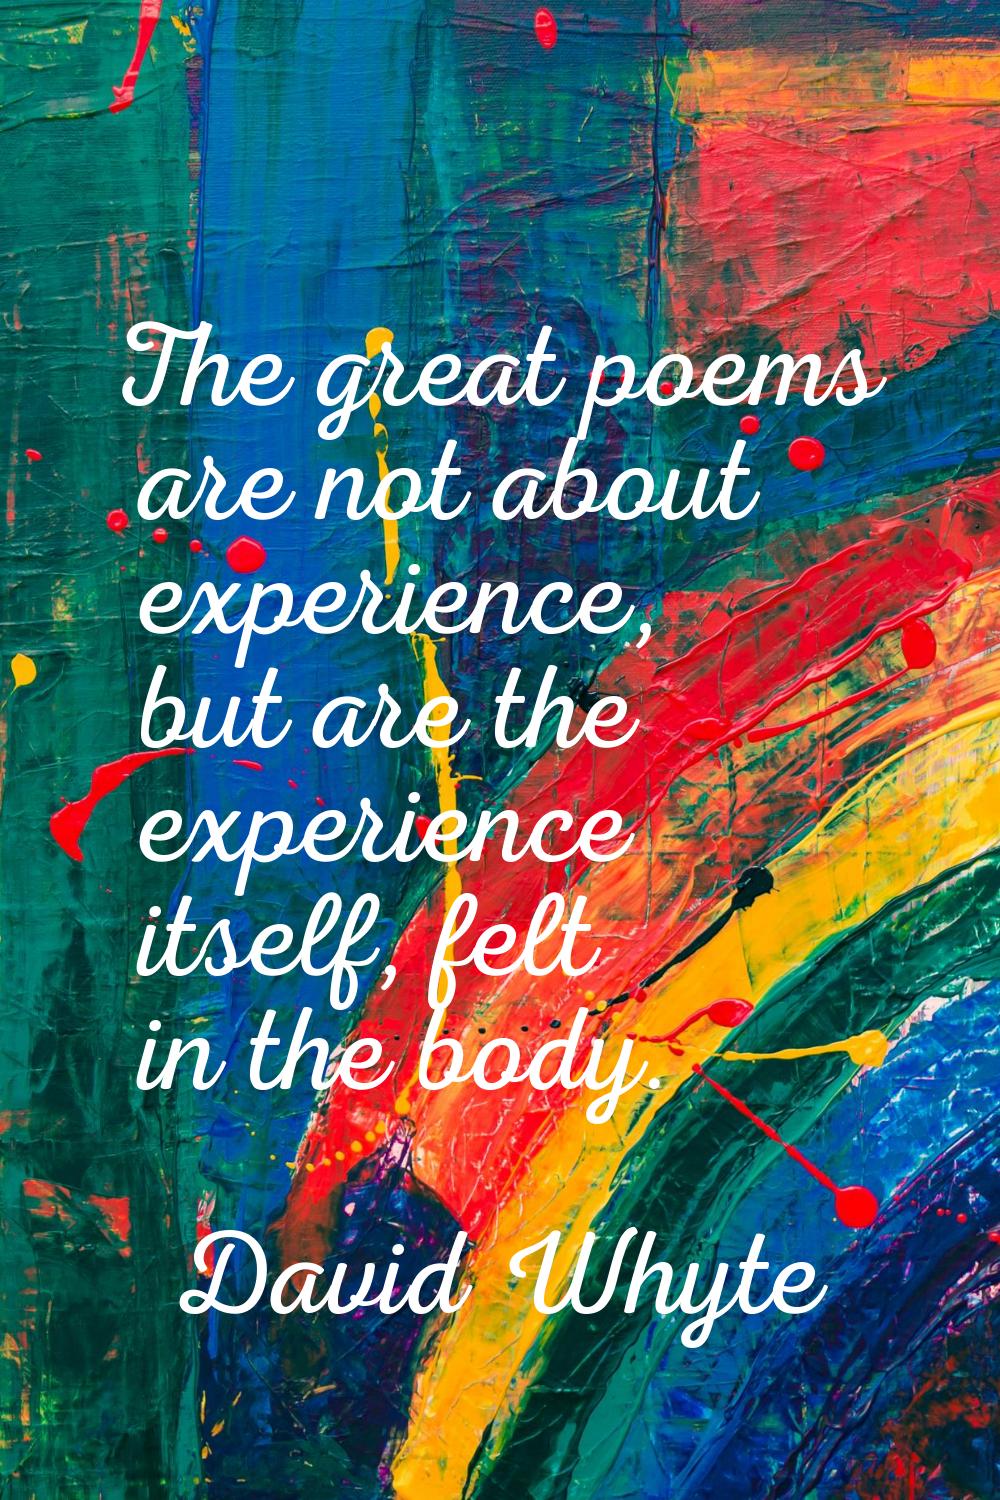 The great poems are not about experience, but are the experience itself, felt in the body.